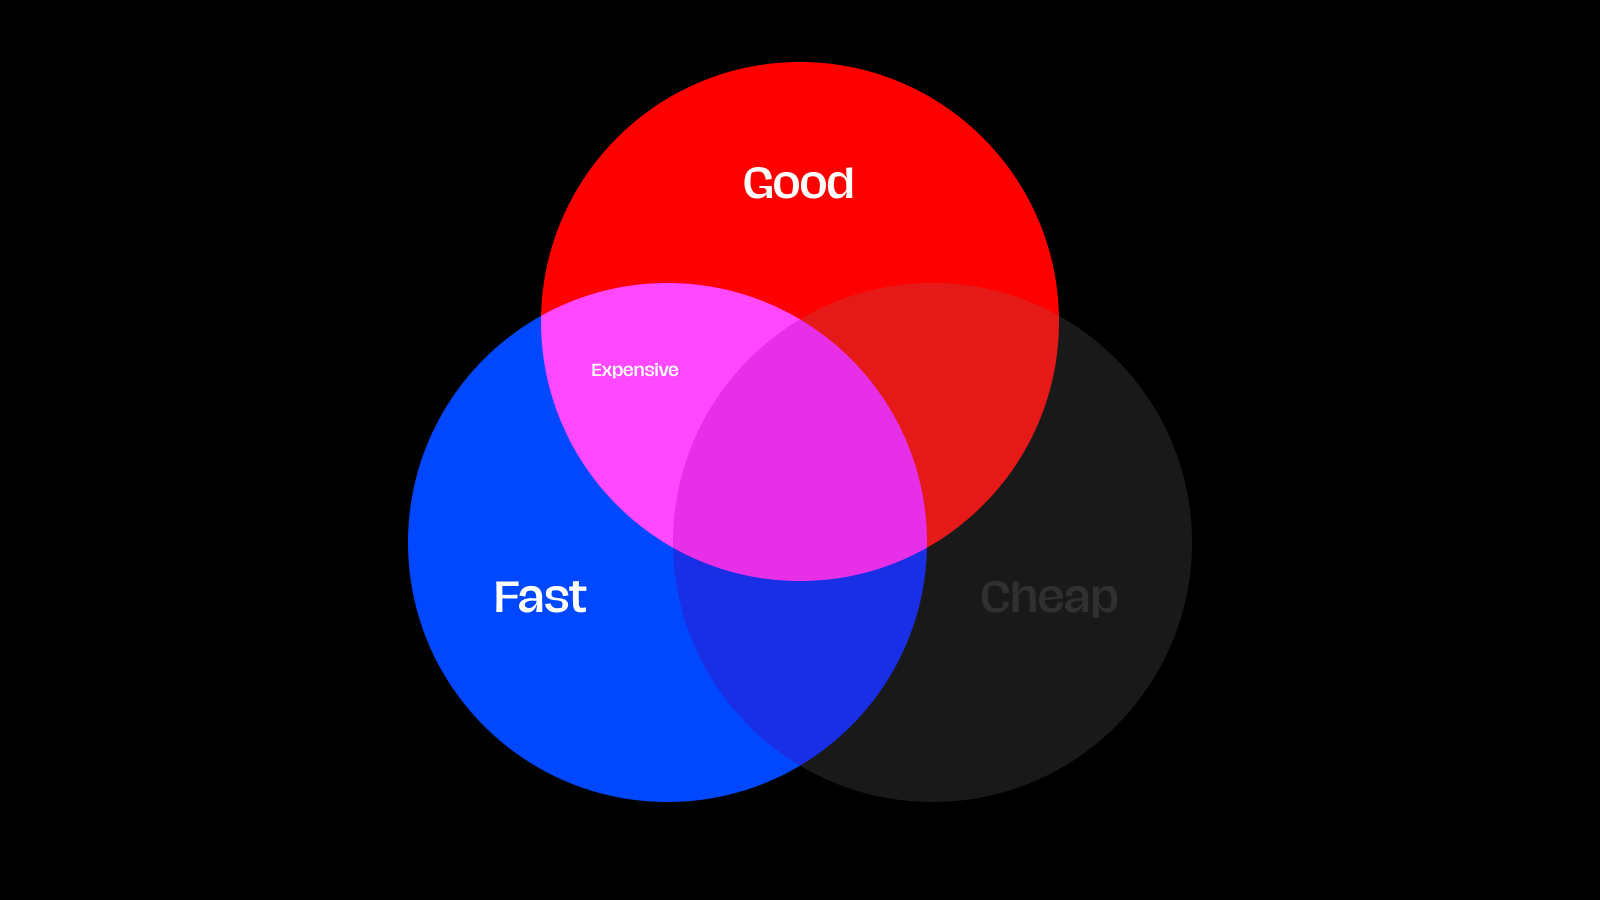 A Venn diagram of two circles: Good and Fast. The combination is Expensive.